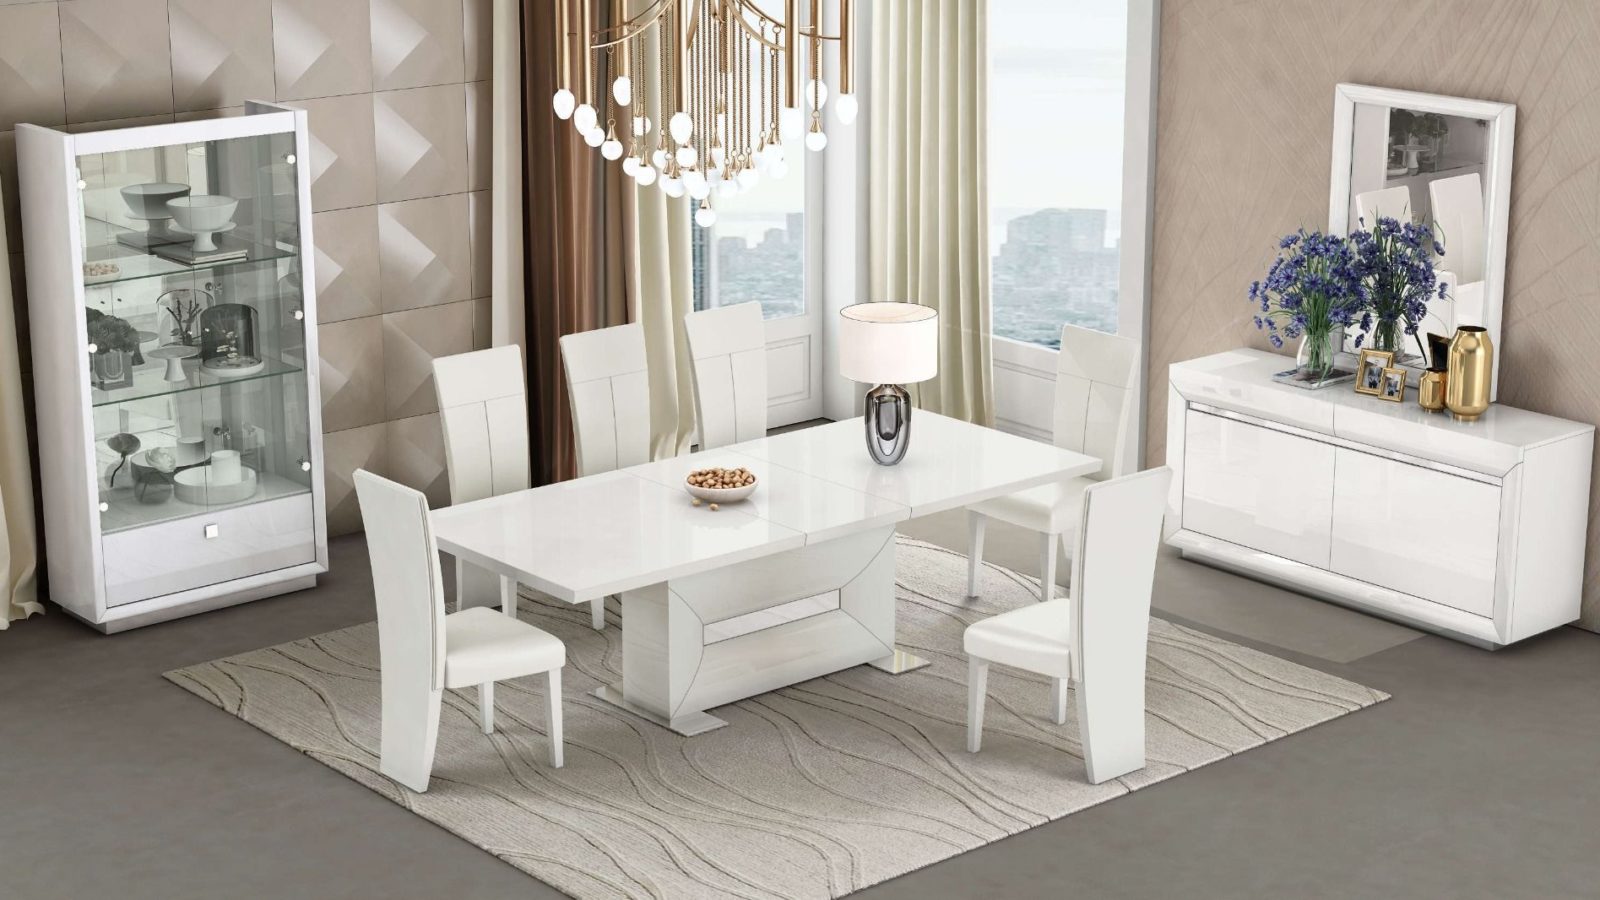 Unique dining room table designs to give a refreshing look to your